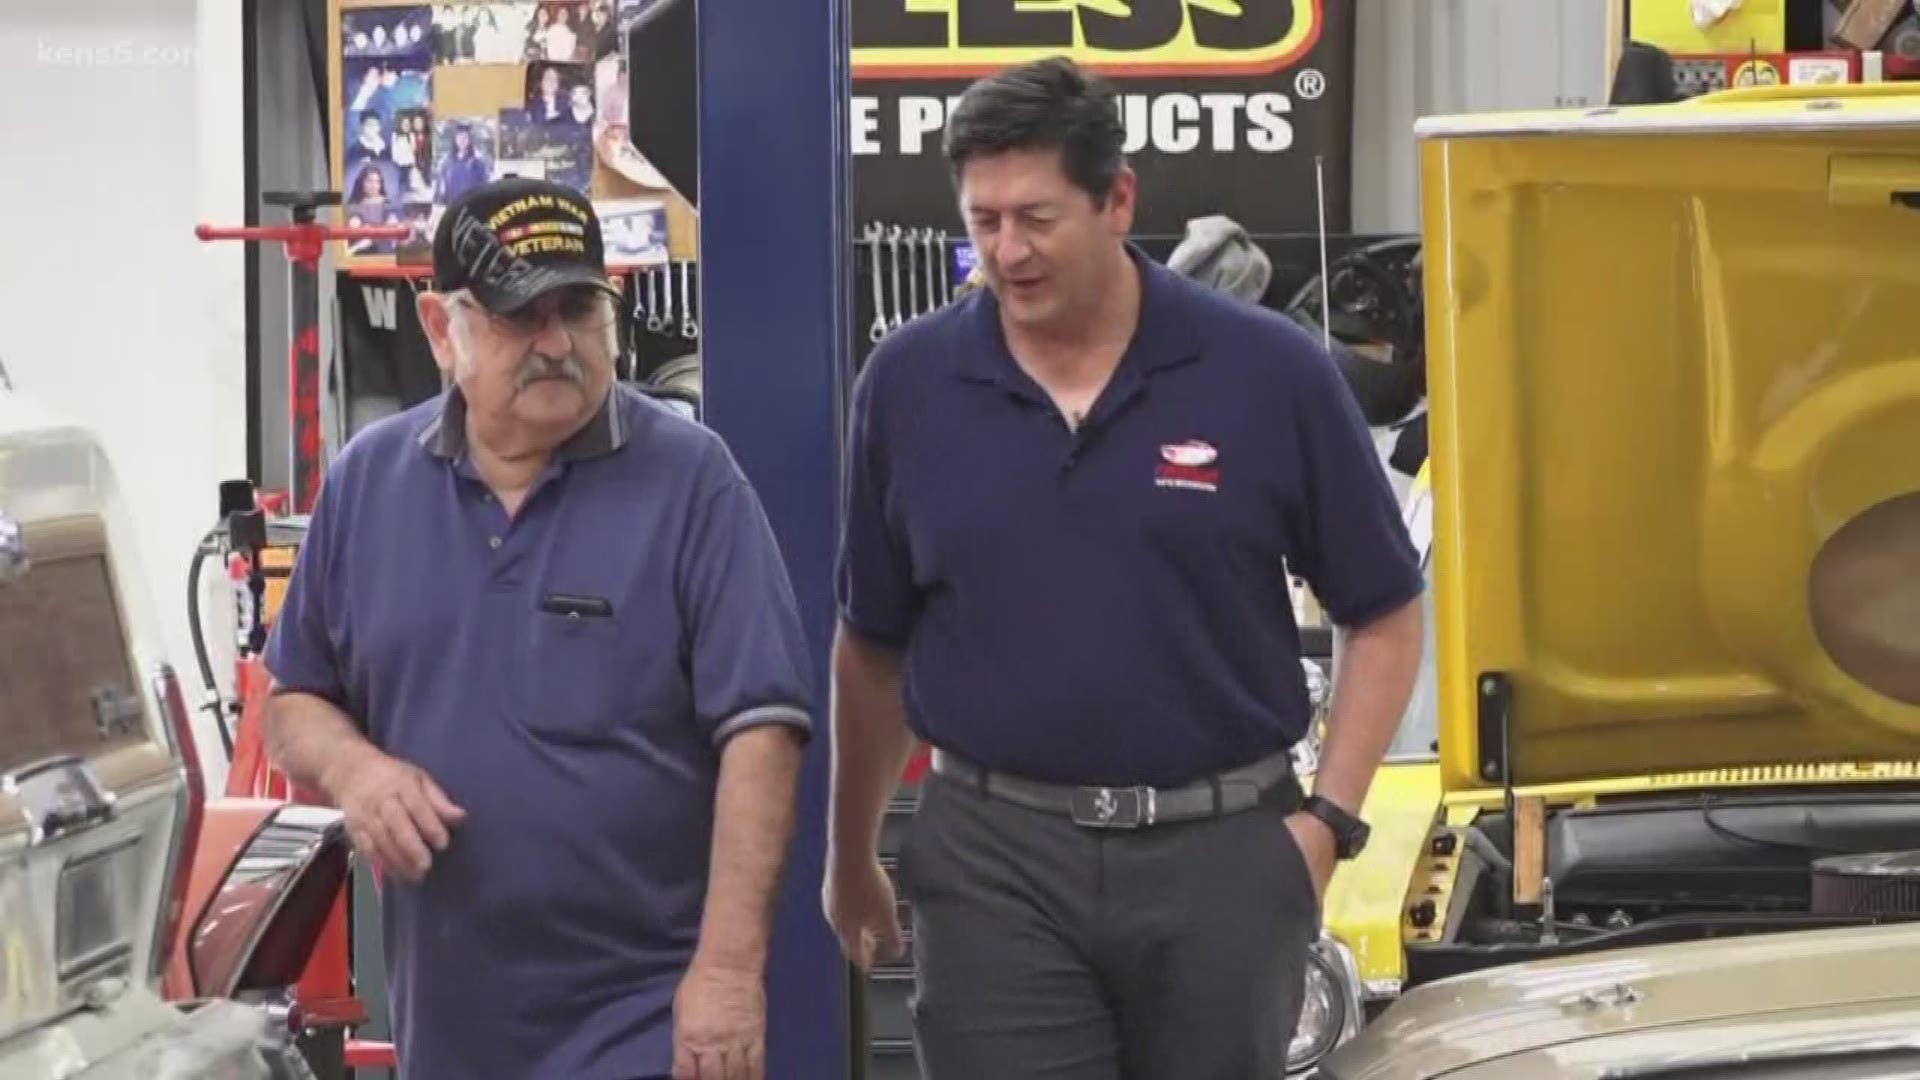 A 69-year-old Vietnam veteran turned auto mechanic is retiring early, thanks to the generosity of his boss of over 13 years.